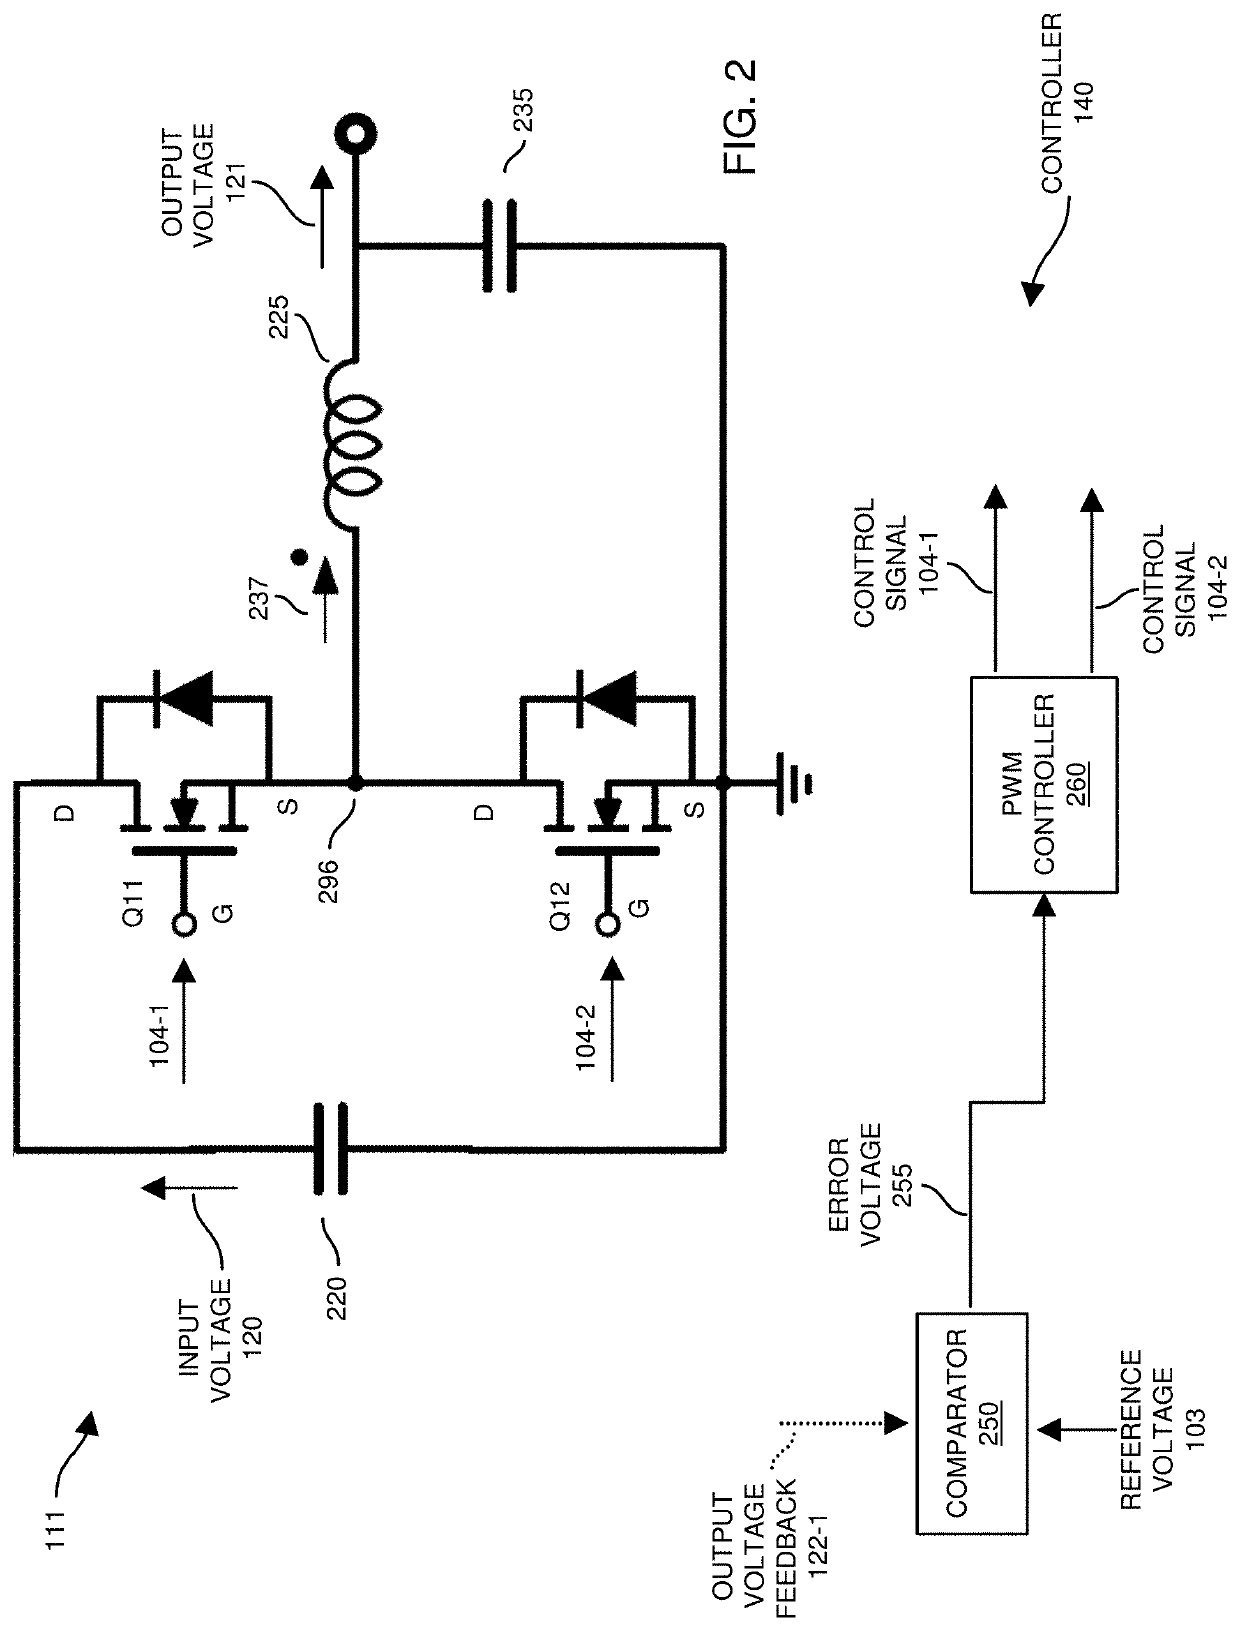 Multiple-stage power conversion